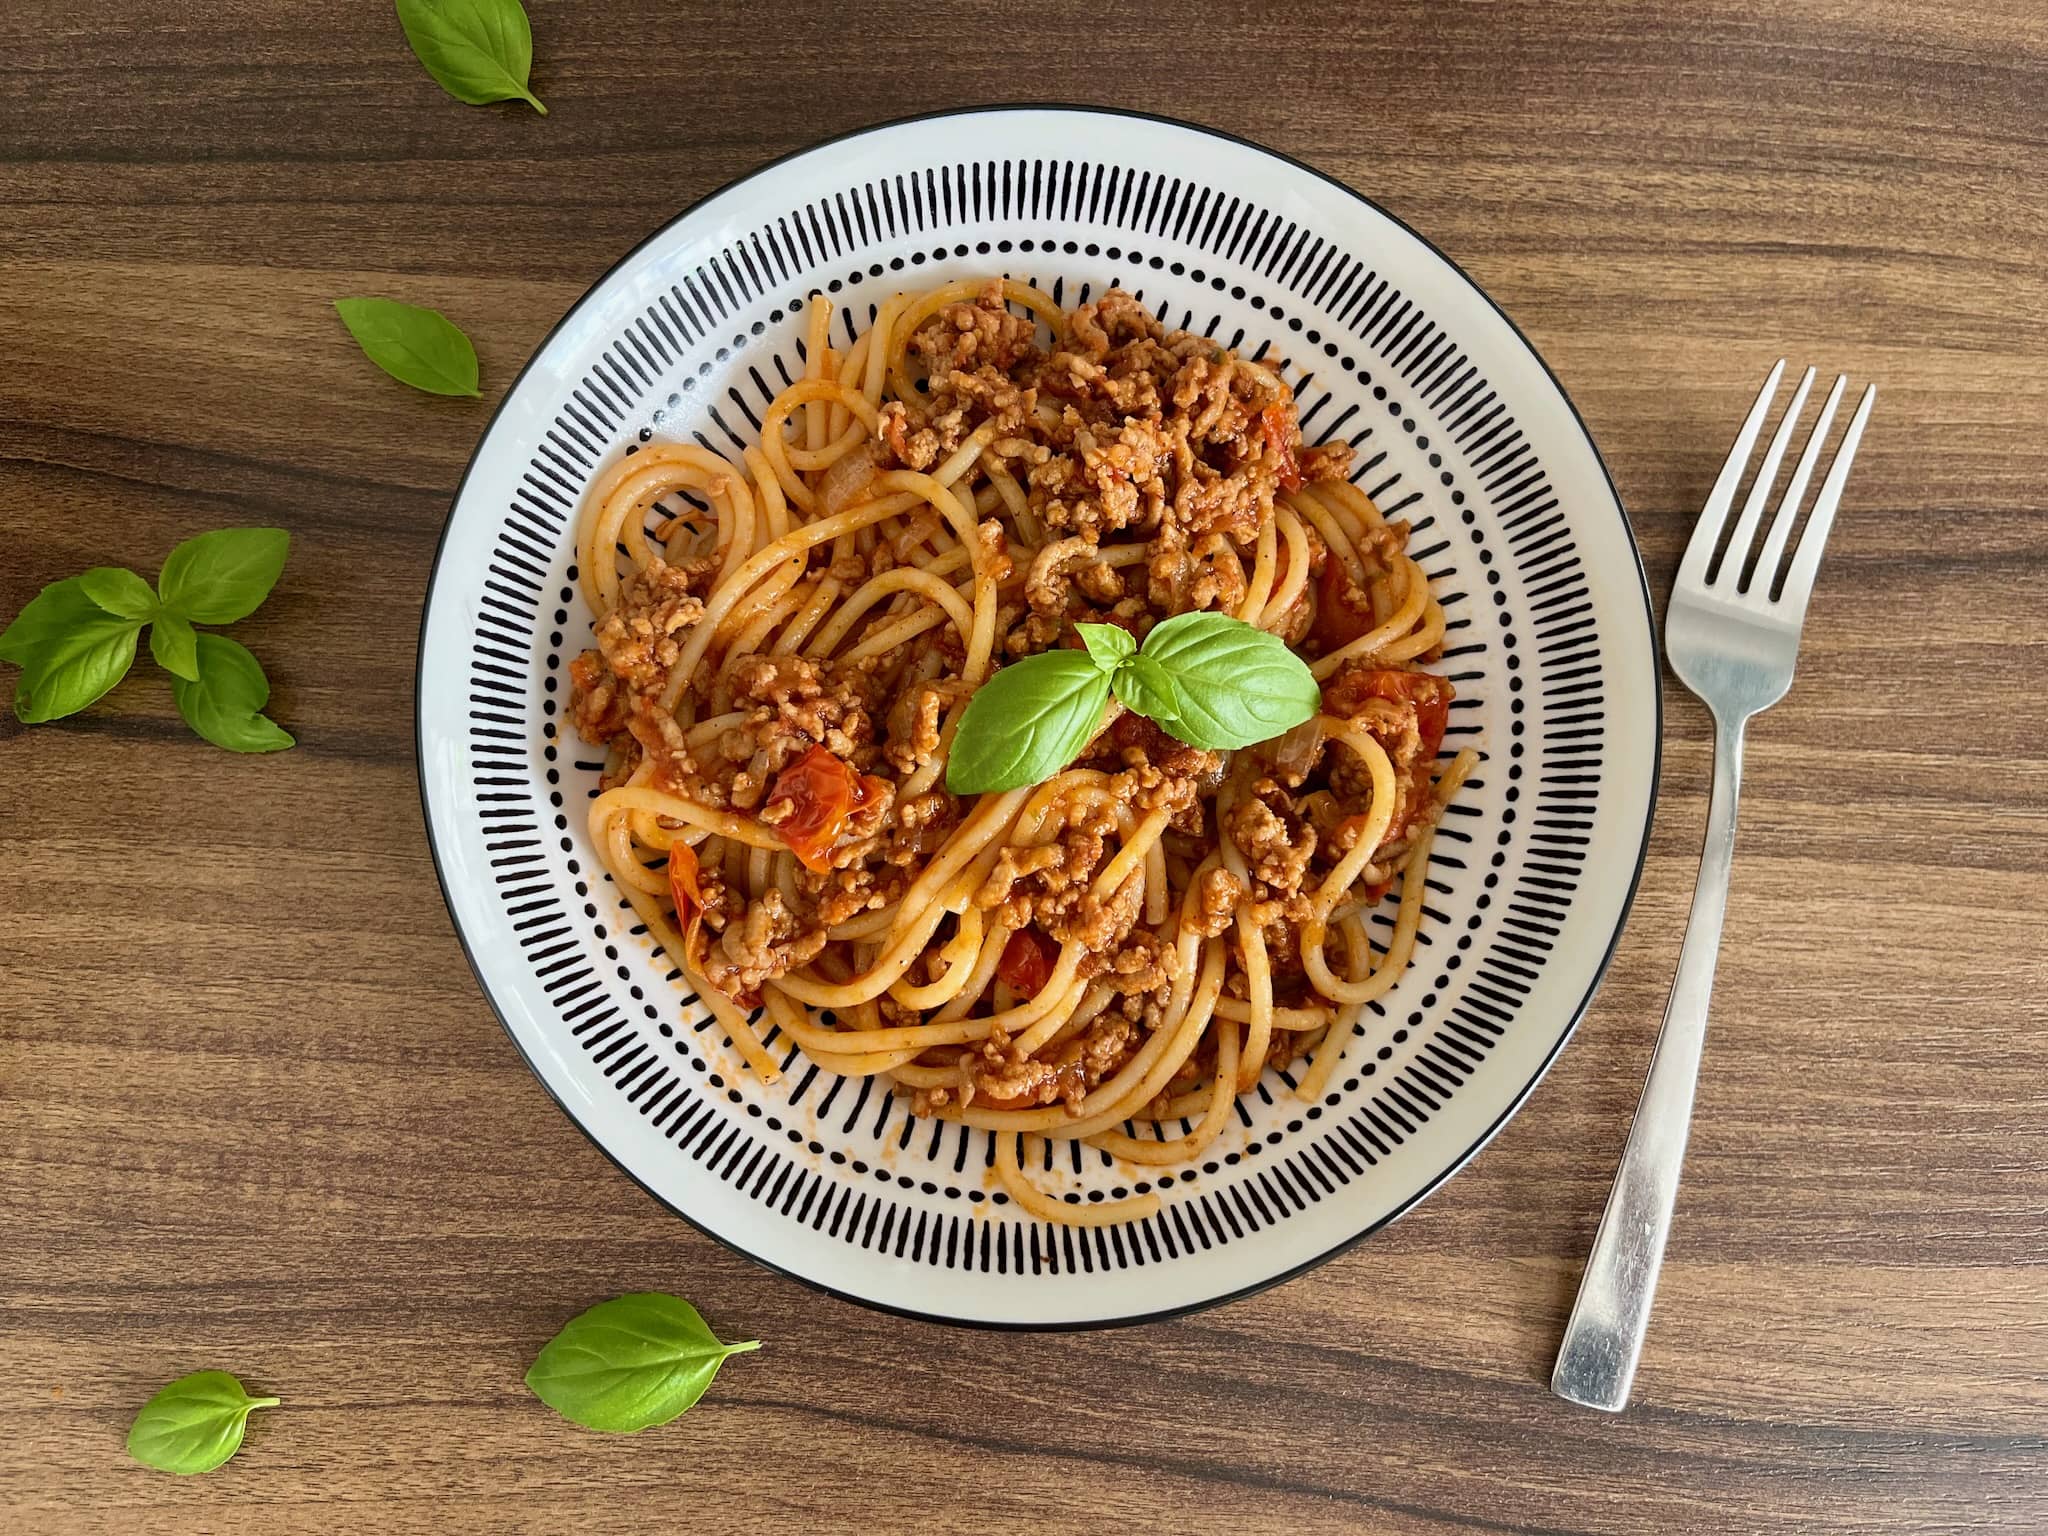 Spaghetti Bolognese in a dish decorated with a basil leaf